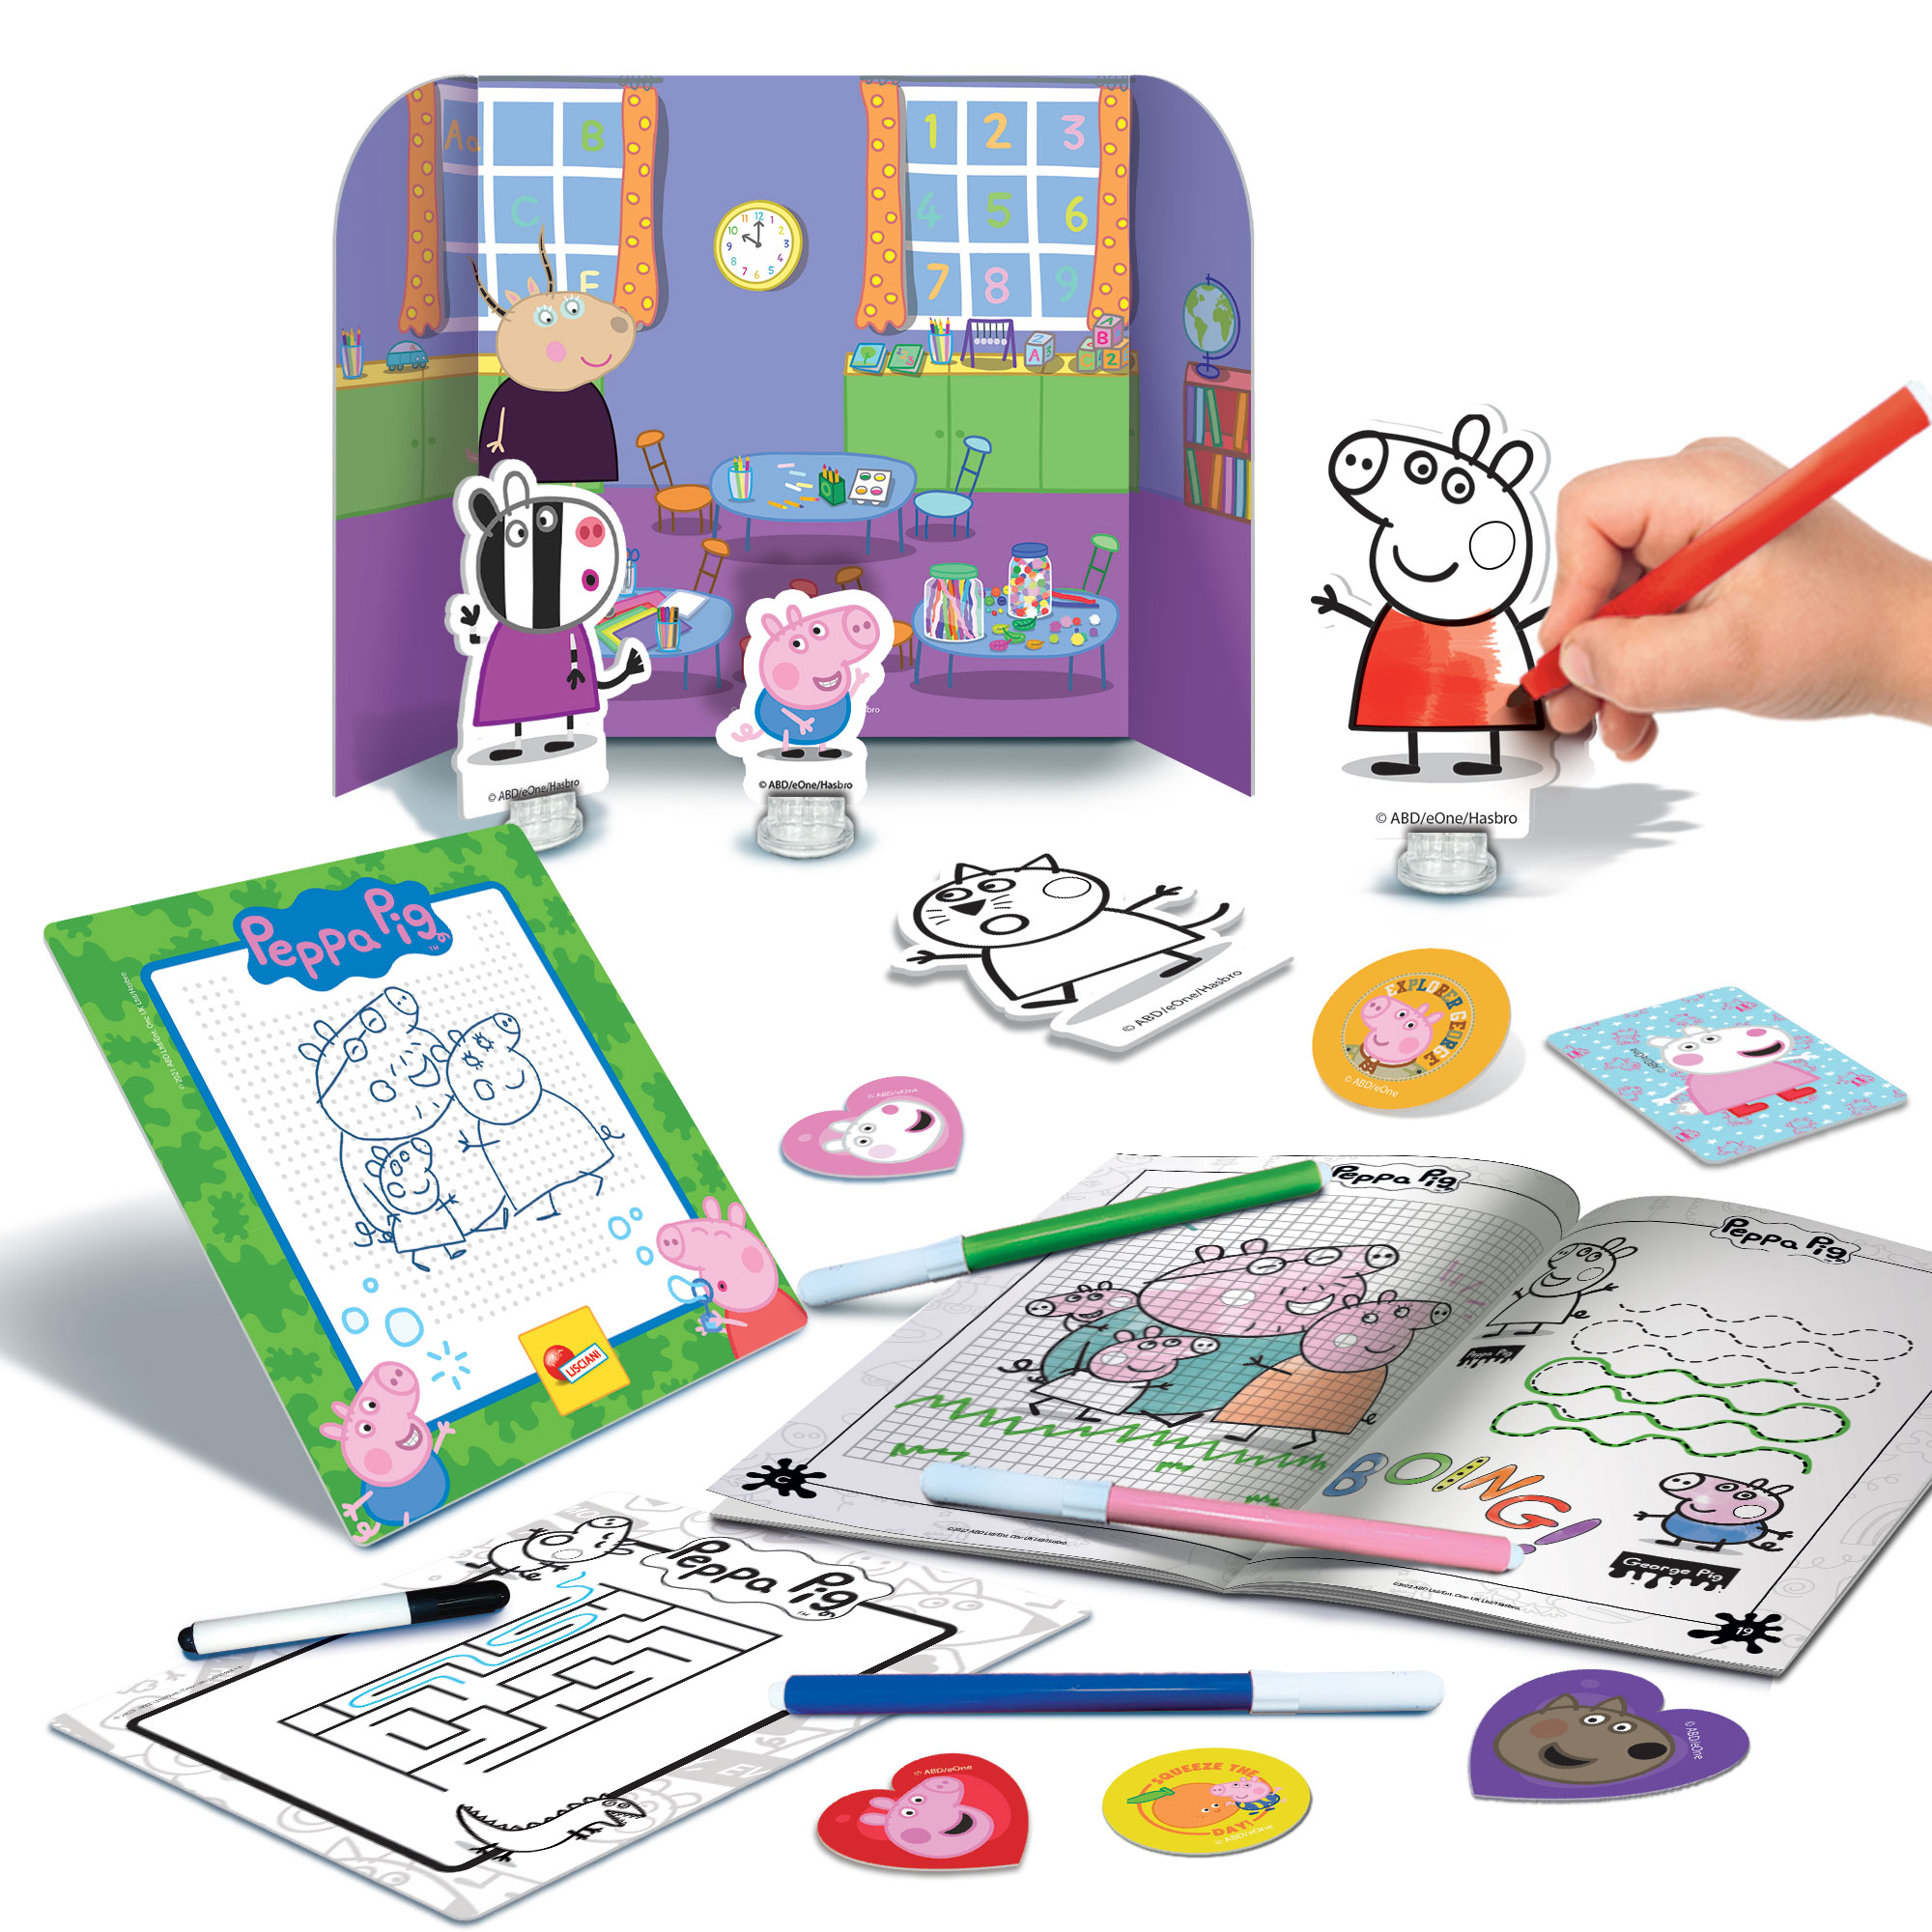 Photo 2 of the game PEPPA PIG ZAINETTO COLOURING AND DRAWING SCHOOL